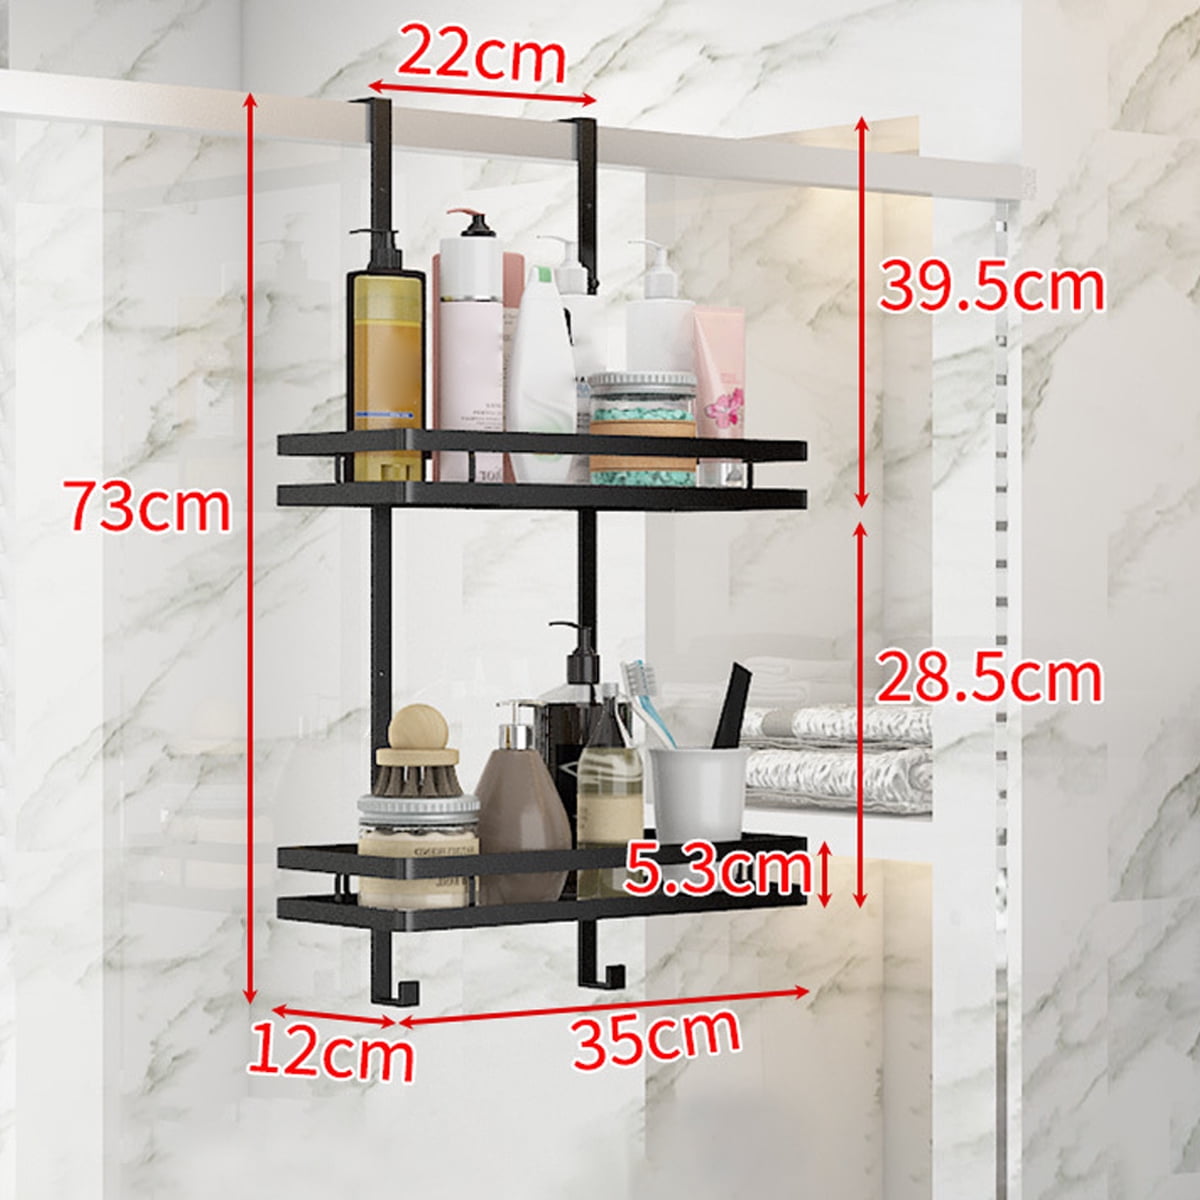 Wooden shower rack hanging on wall or glass wall – Trelyz